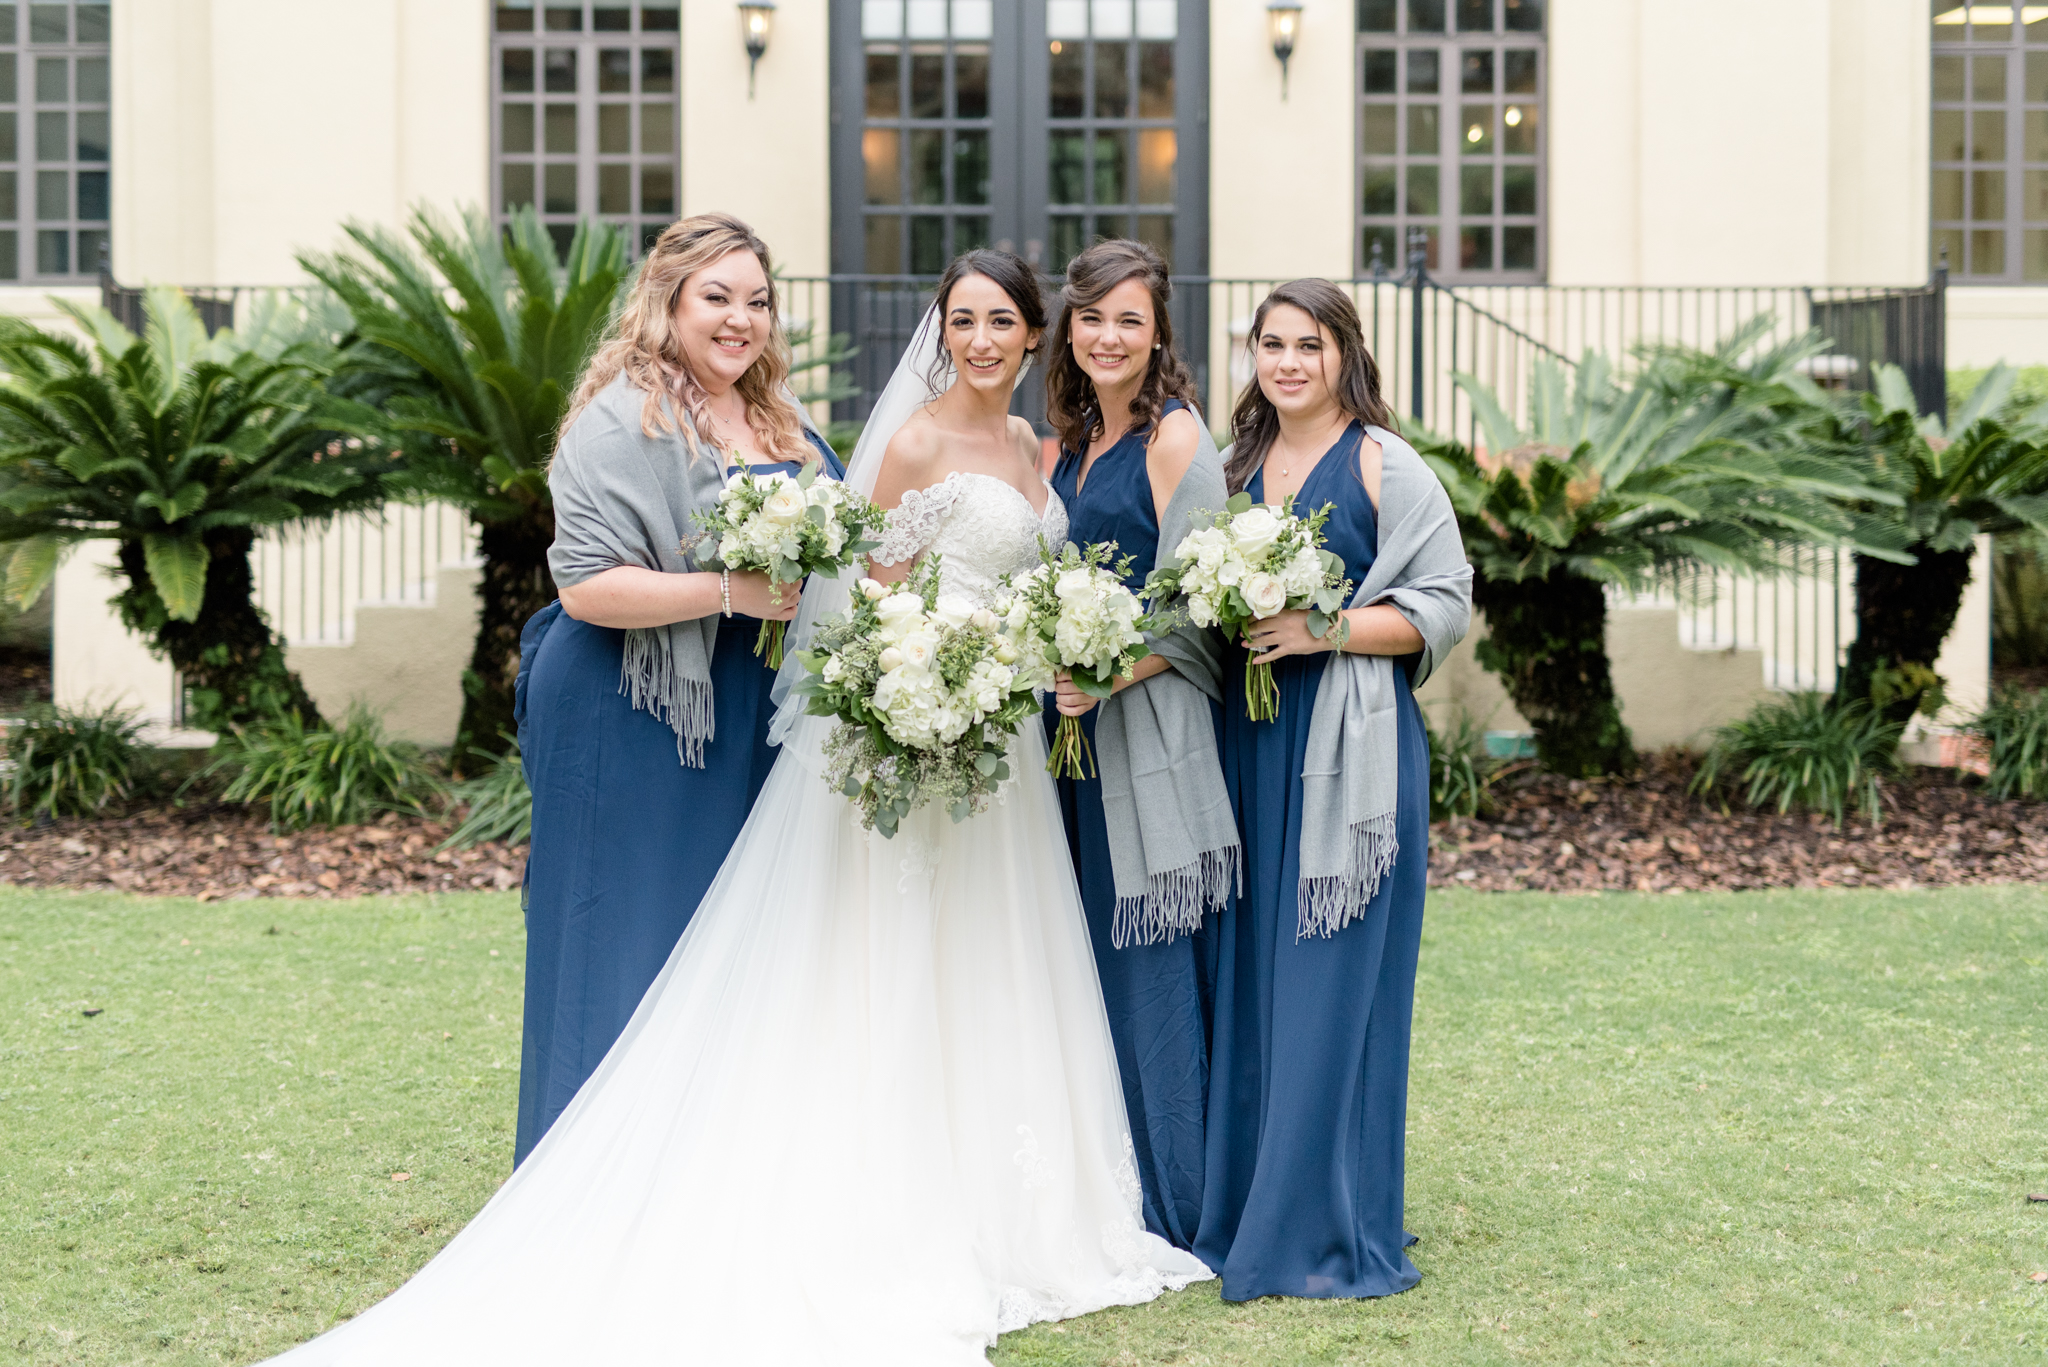 Bride and bridesmaids smile together.